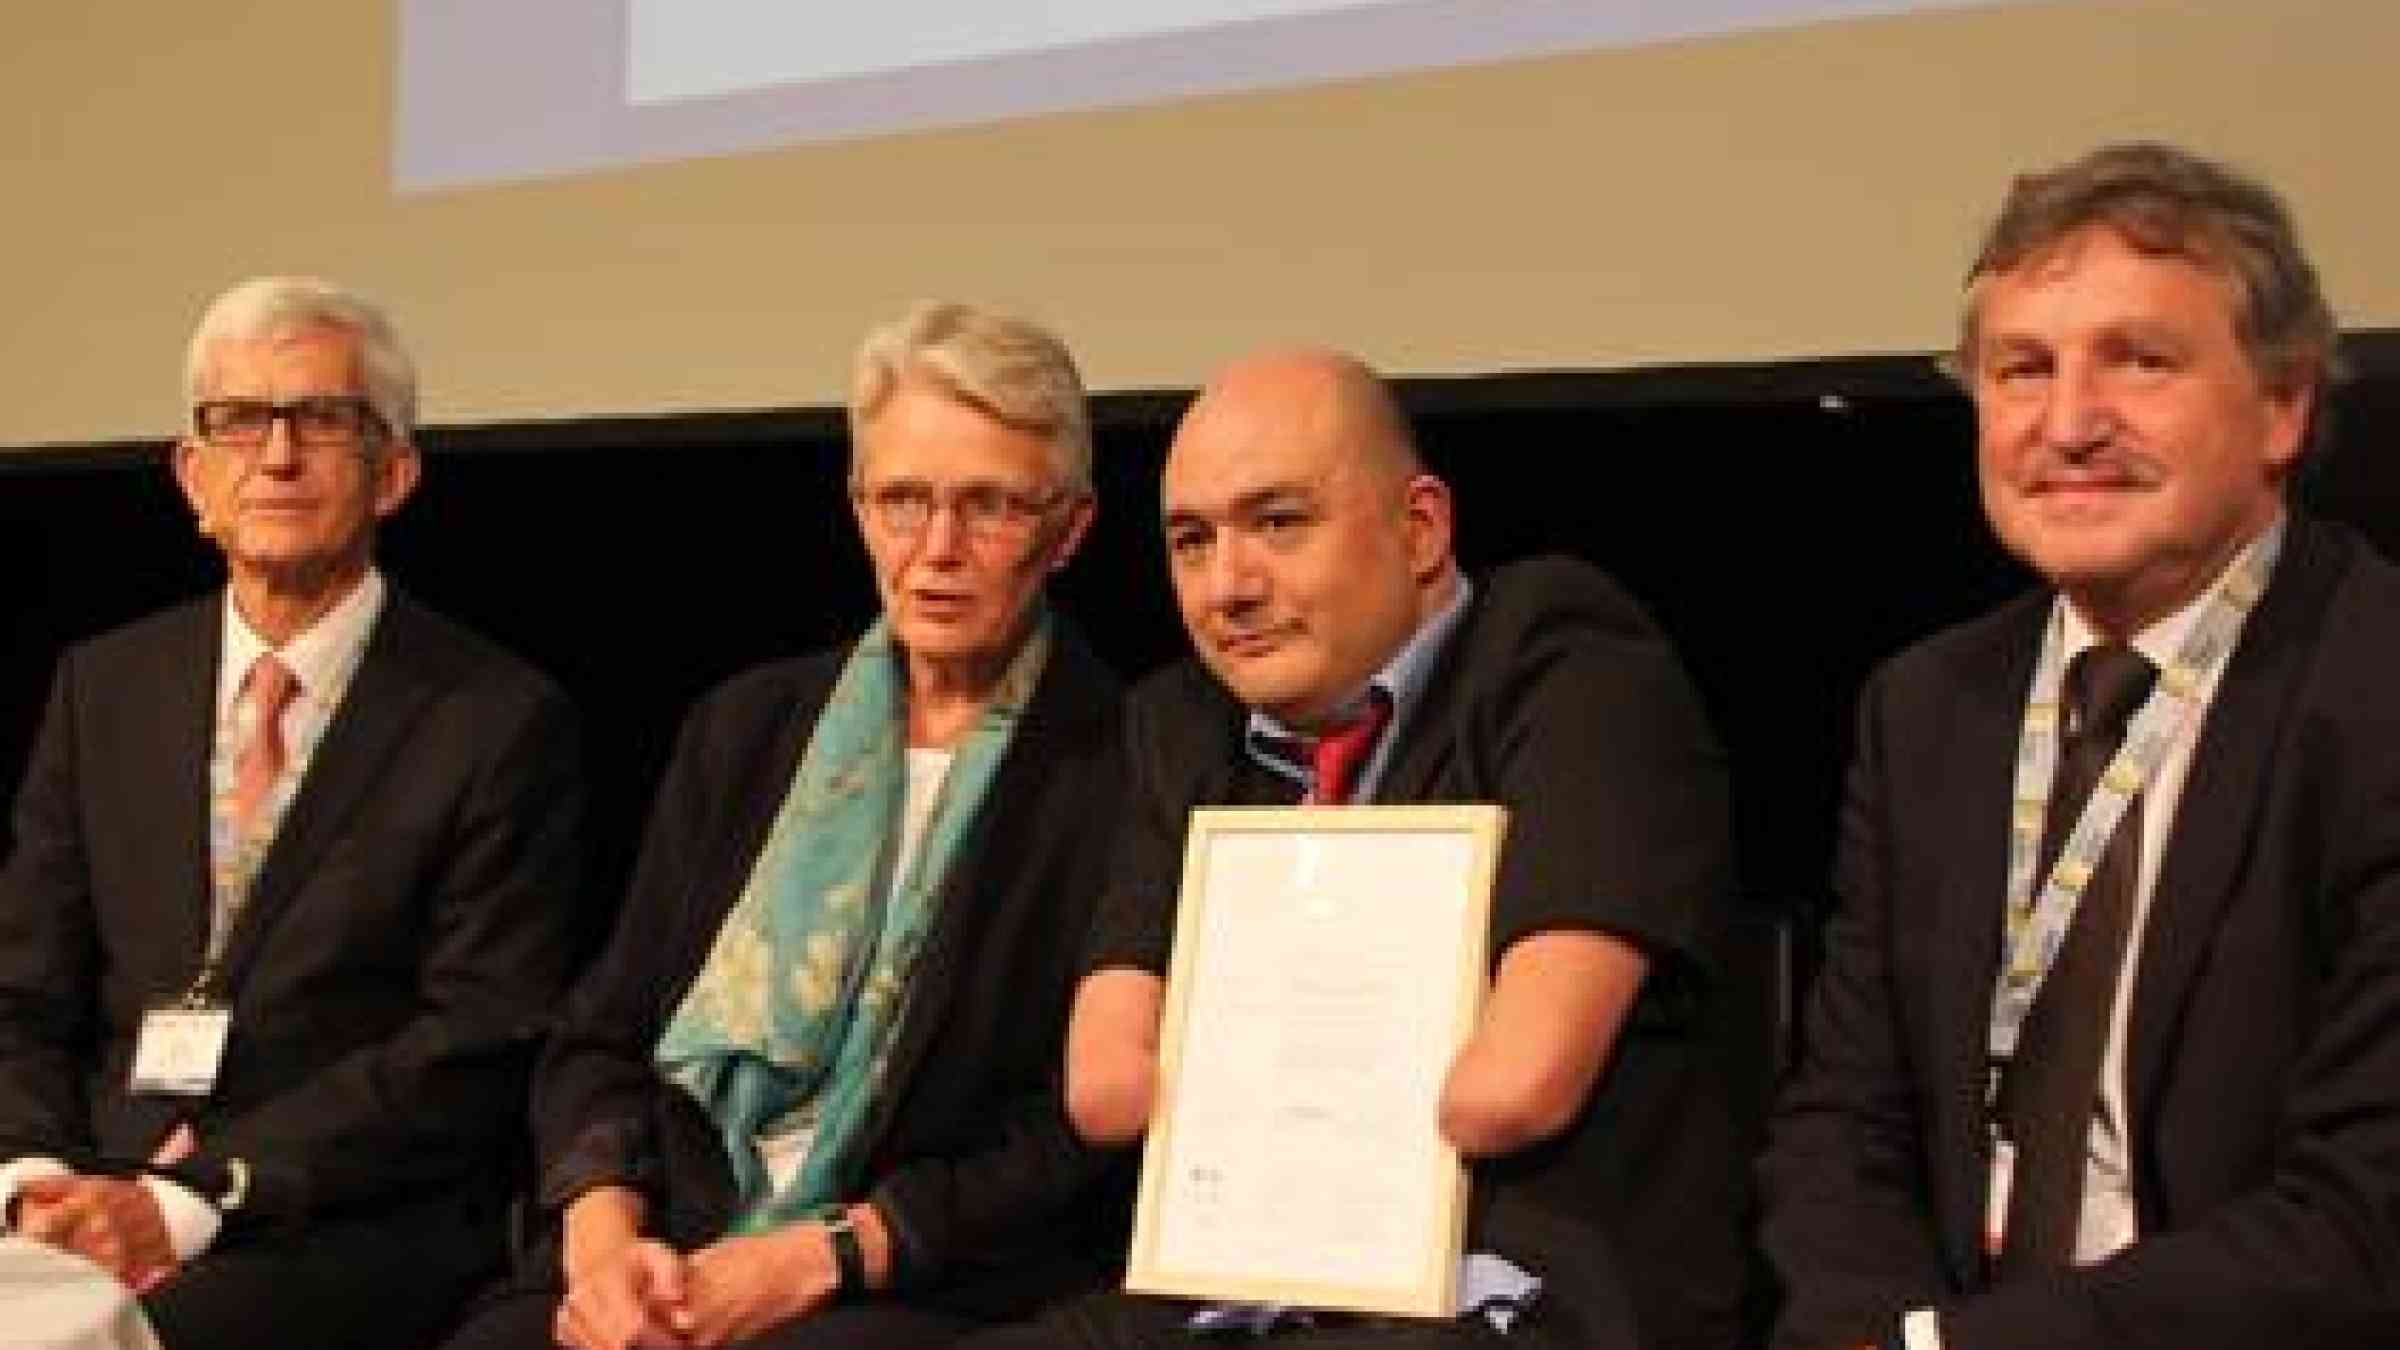 At the 2014 Risk Award ceremony in Davos (from left):  Walter J. Amman, Global Risk Forum; Margareta Wahlstrom, UNISDR; award winner Carlos Kaiser, Inclusiva NGO;  and Thomas Loster, MunichRe Foundation. (Photo: UNISDR)